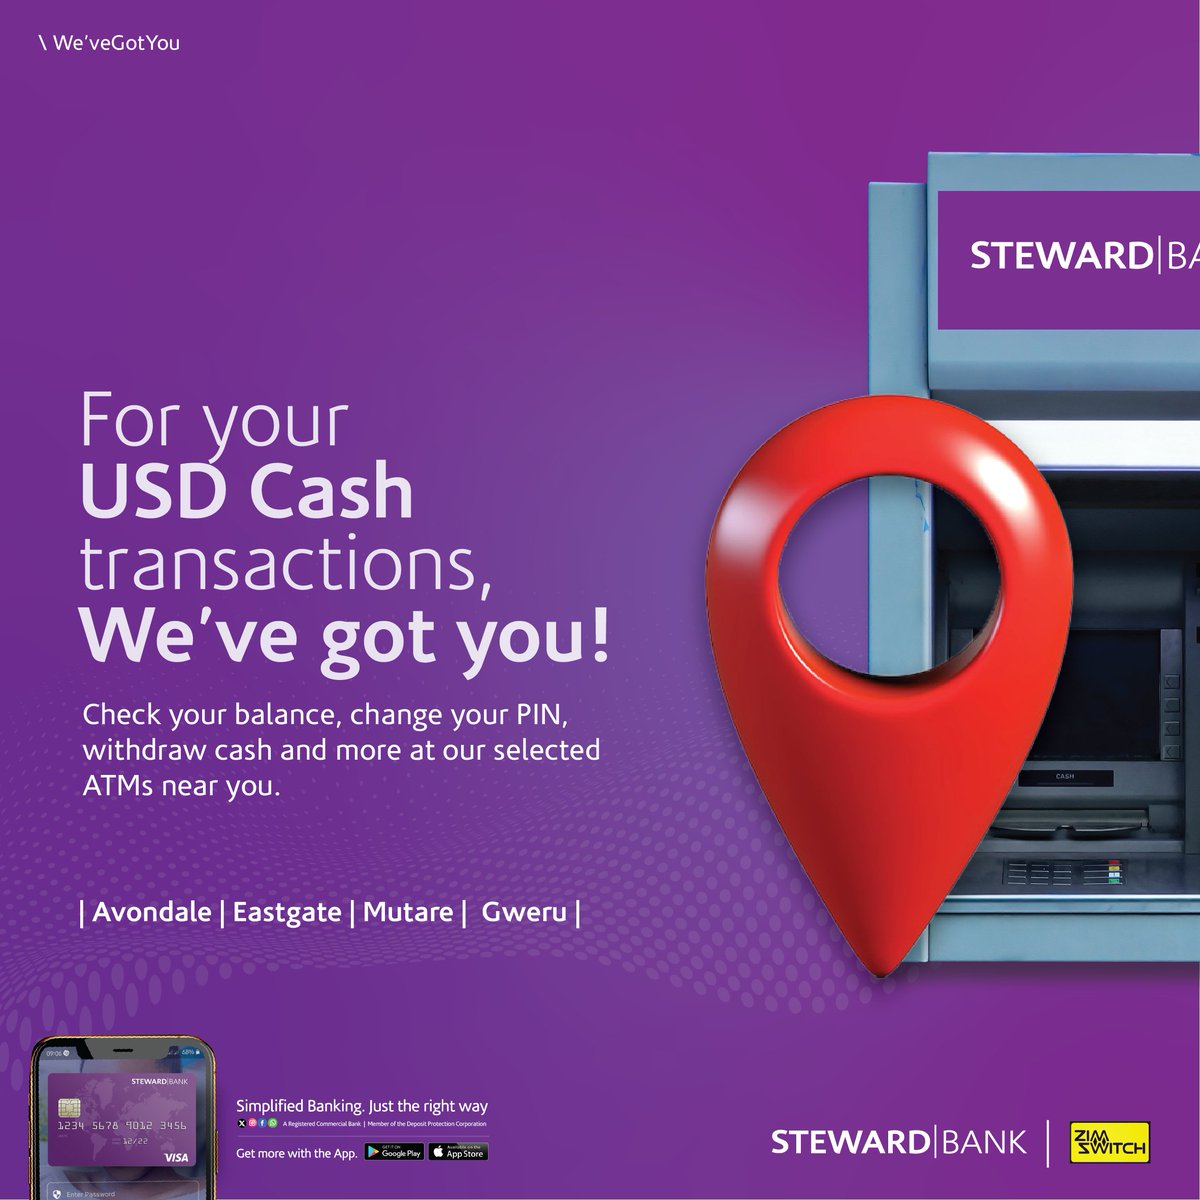 Bank with ease on the Steward Bank smart ATM! 🟪Locations: Avondale branch, Eastgate branch, Gweru branch and Mutare branch. ✅Withdraw USD cash, check balance, change PIN and more. #WeveGotYou